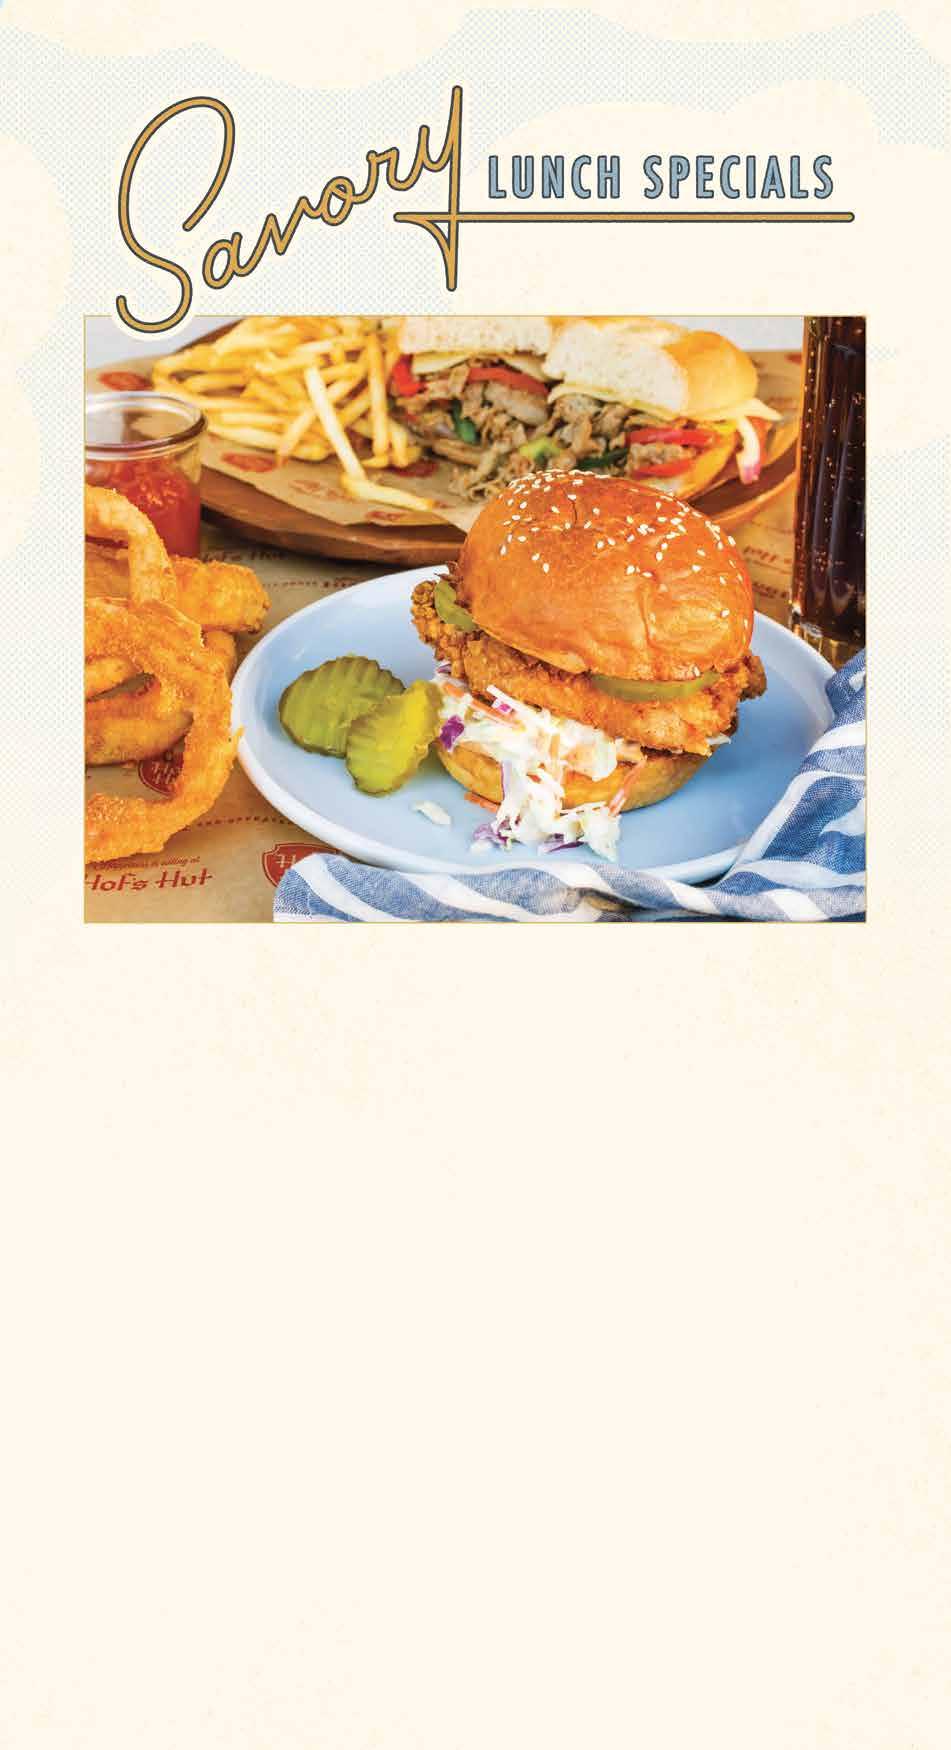 Only available for a limited time APPETIZERS Fried Chicken Sandwich House-breaded and fried chicken breast, pickles, cole slaw and spicy mayonnaise on a sesame brioche bun.